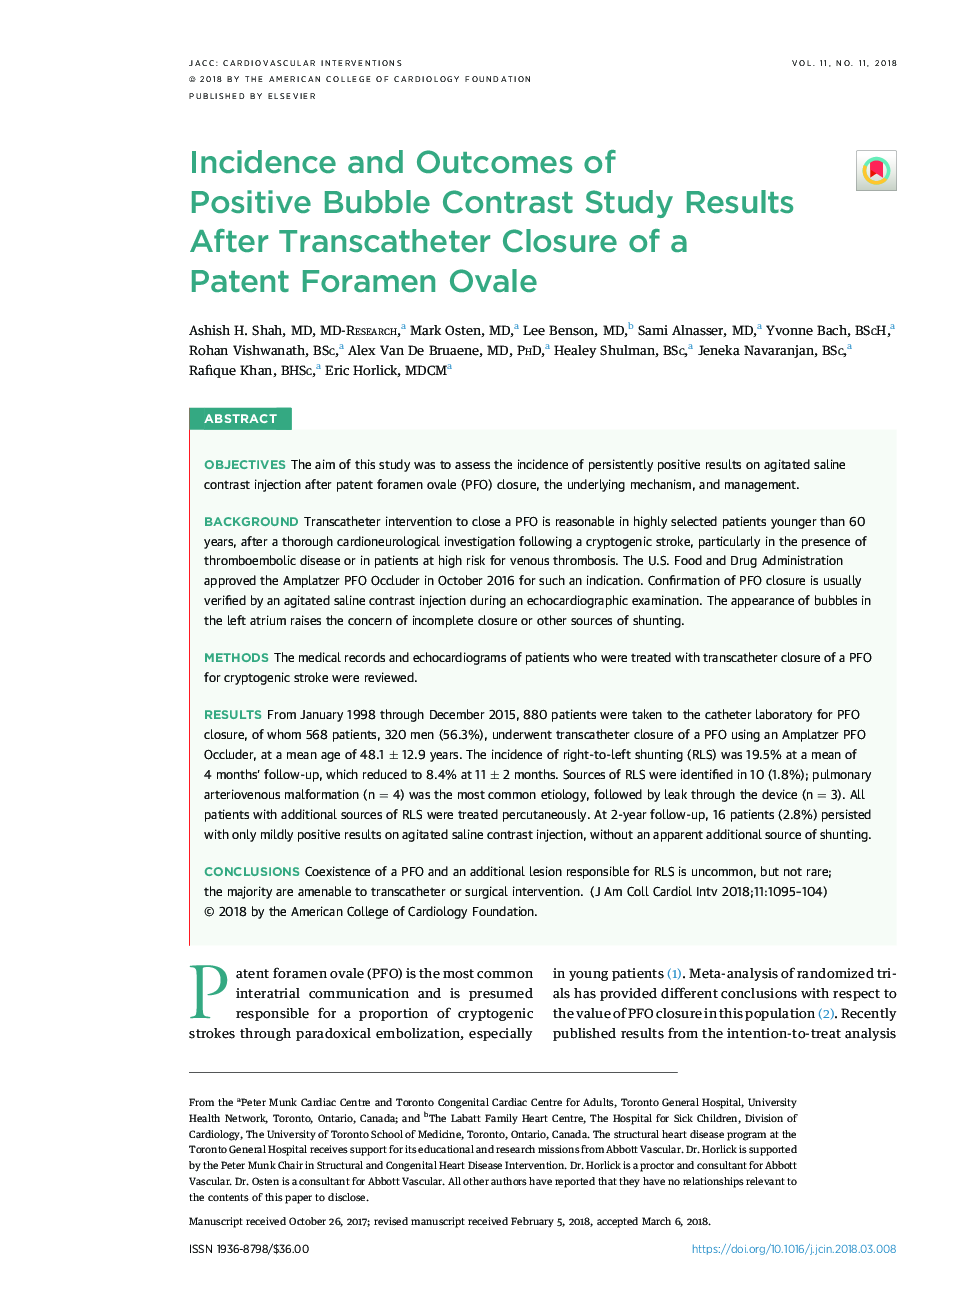 Incidence and Outcomes of PositiveÂ Bubble Contrast Study Results After Transcatheter Closure of a PatentÂ Foramen Ovale